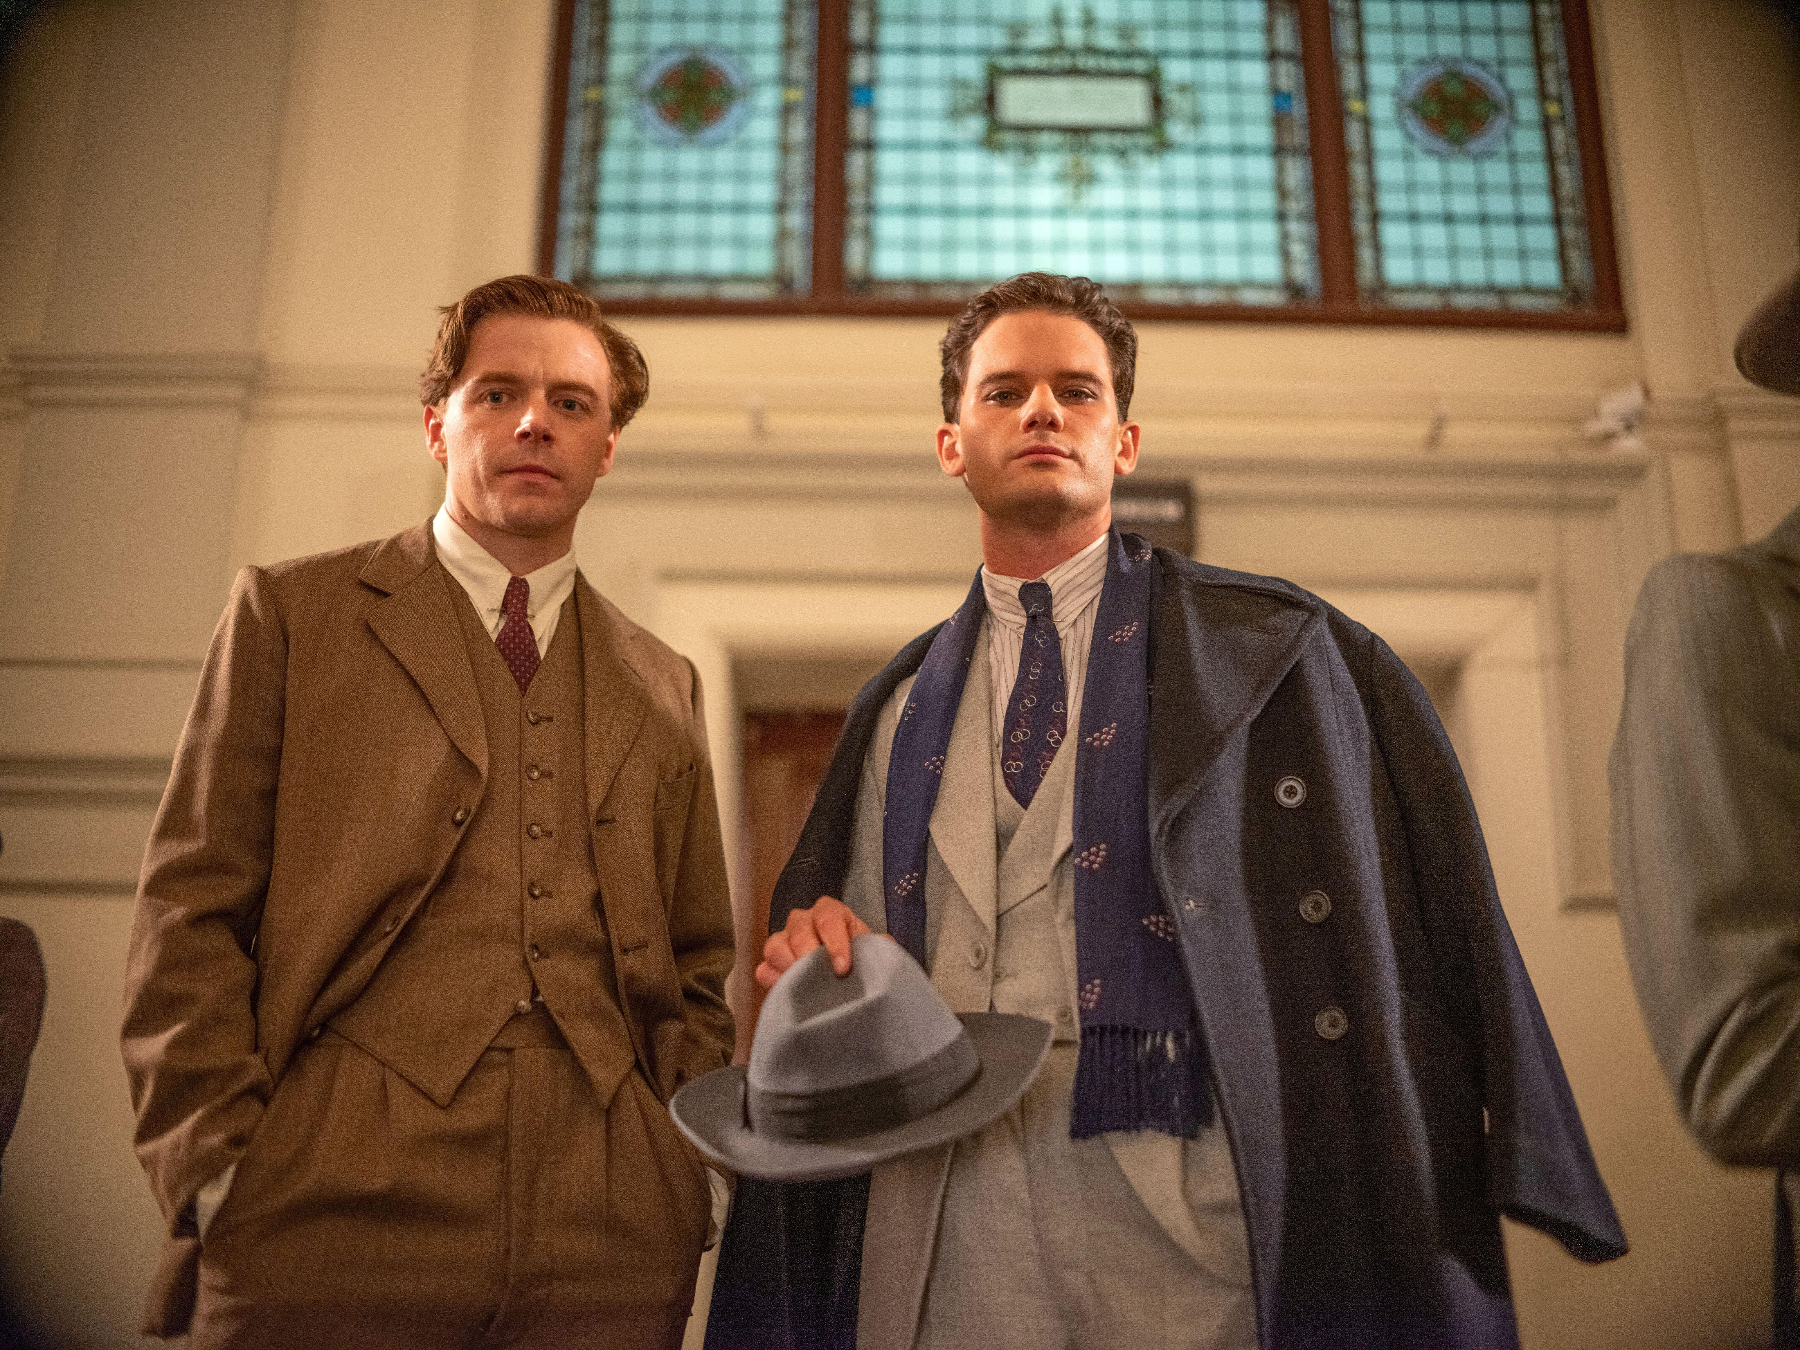 Jeremy Irvine and Jack Lowden stand in vintage suits